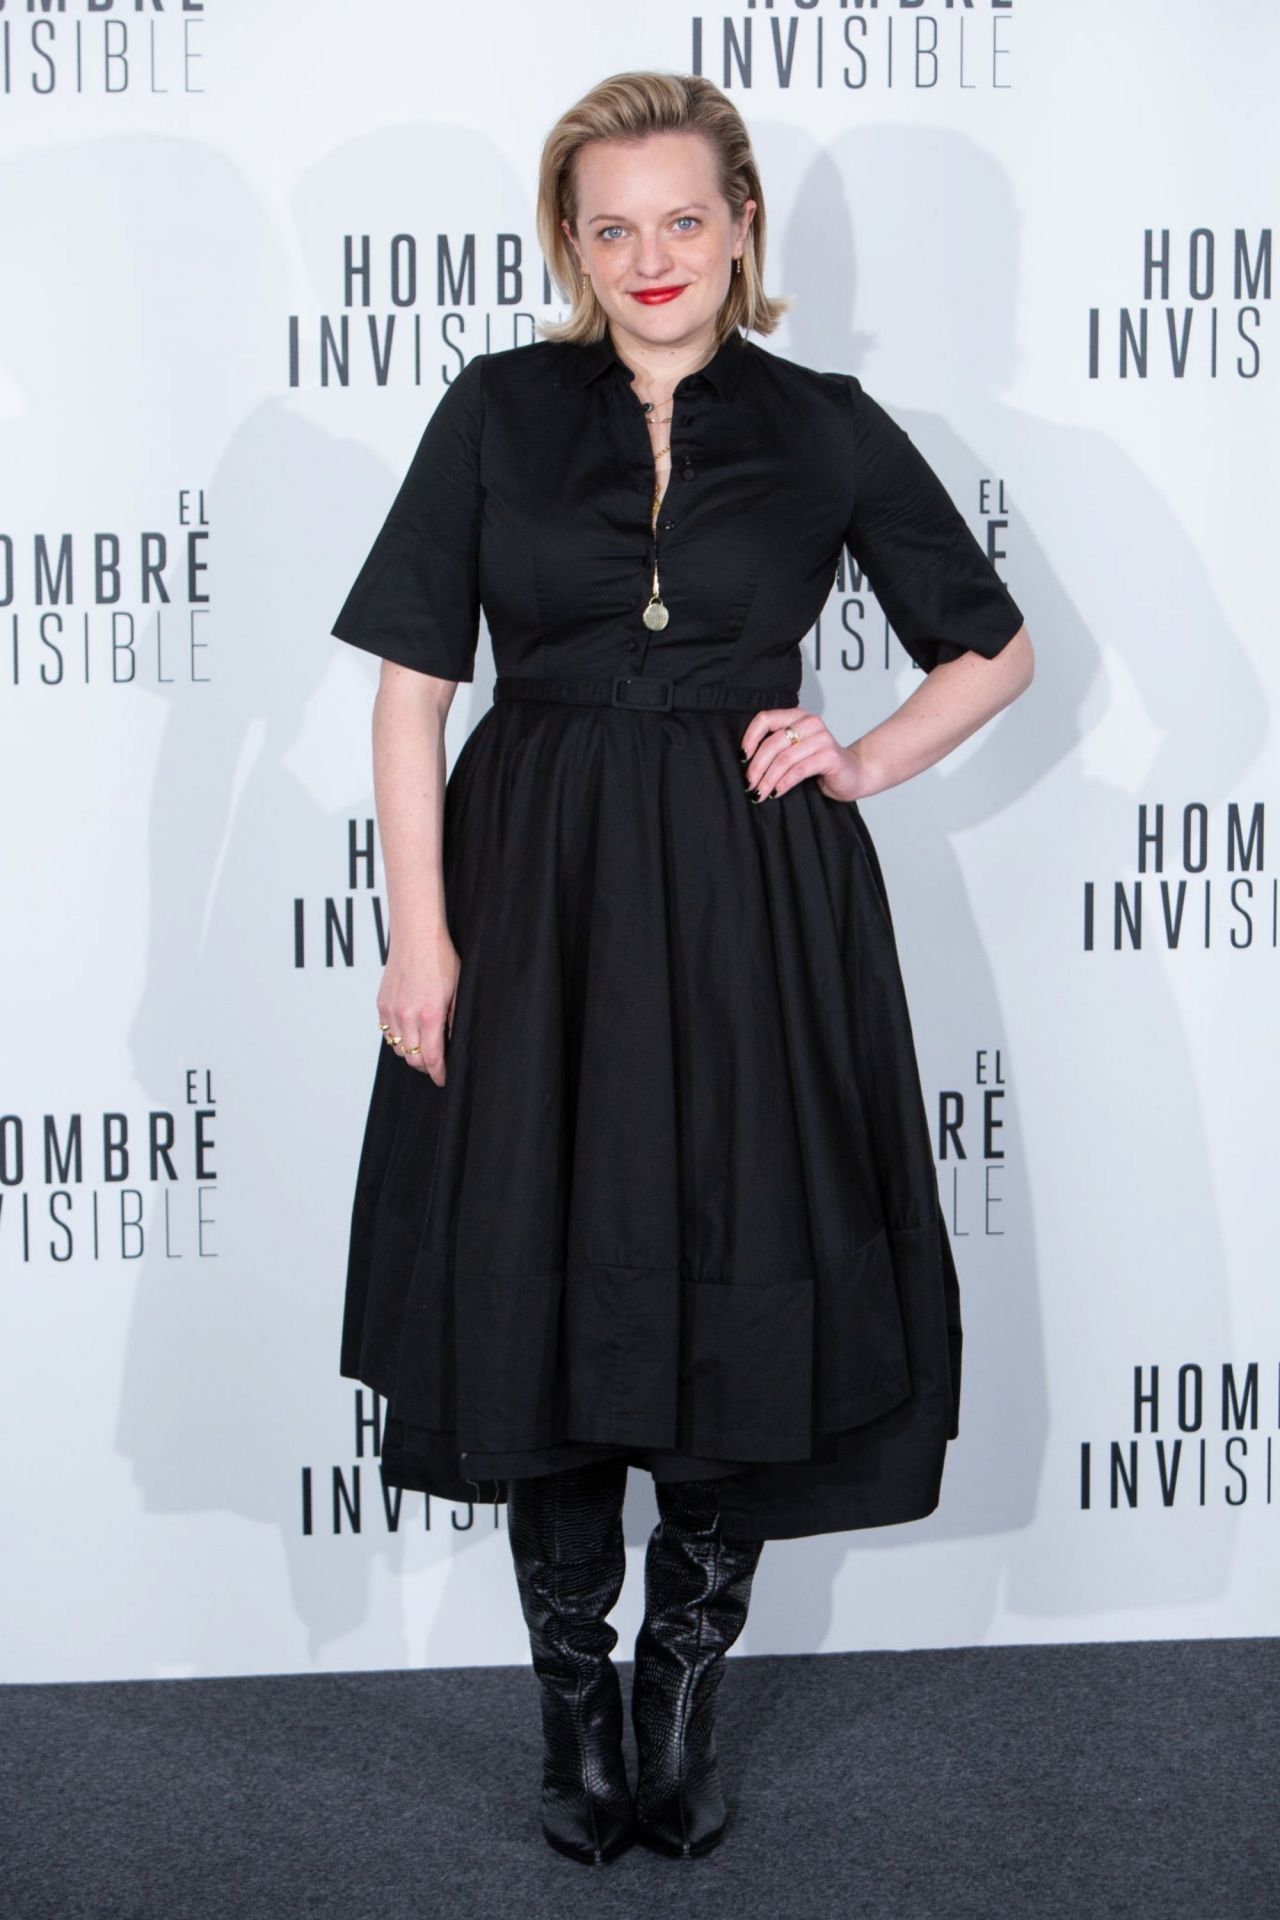 Elisabeth Moss  In CO Dress @  “The Invisible Man” Premiere in Madrid